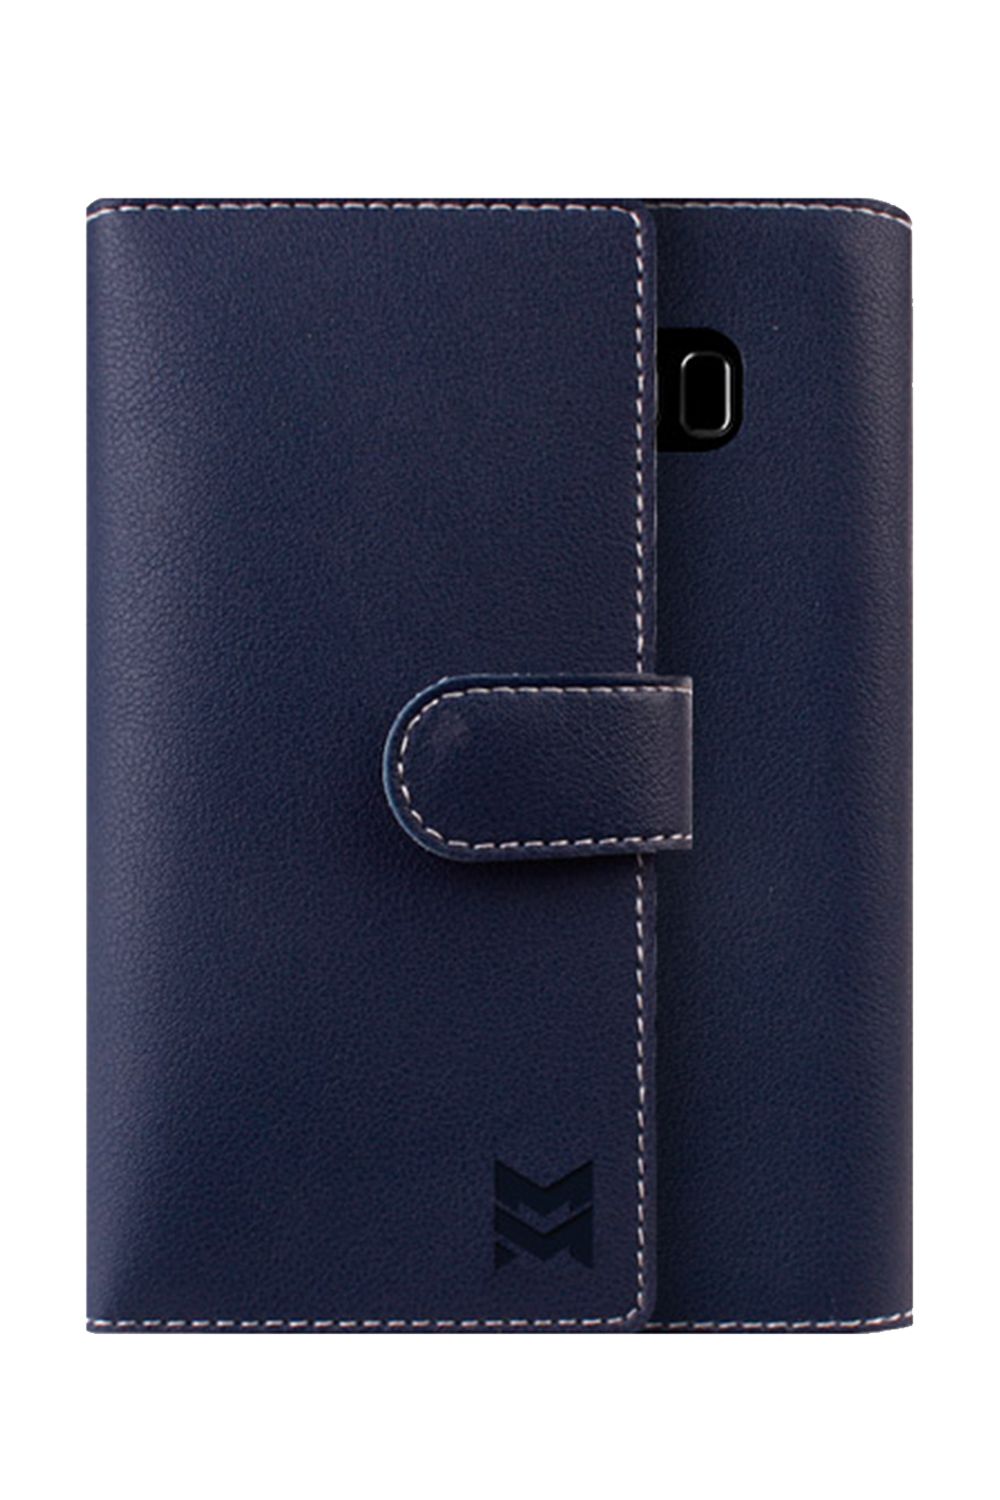 iPhone 11 Pro Maximo Vintage Edition Daily Wallet Case - Navy